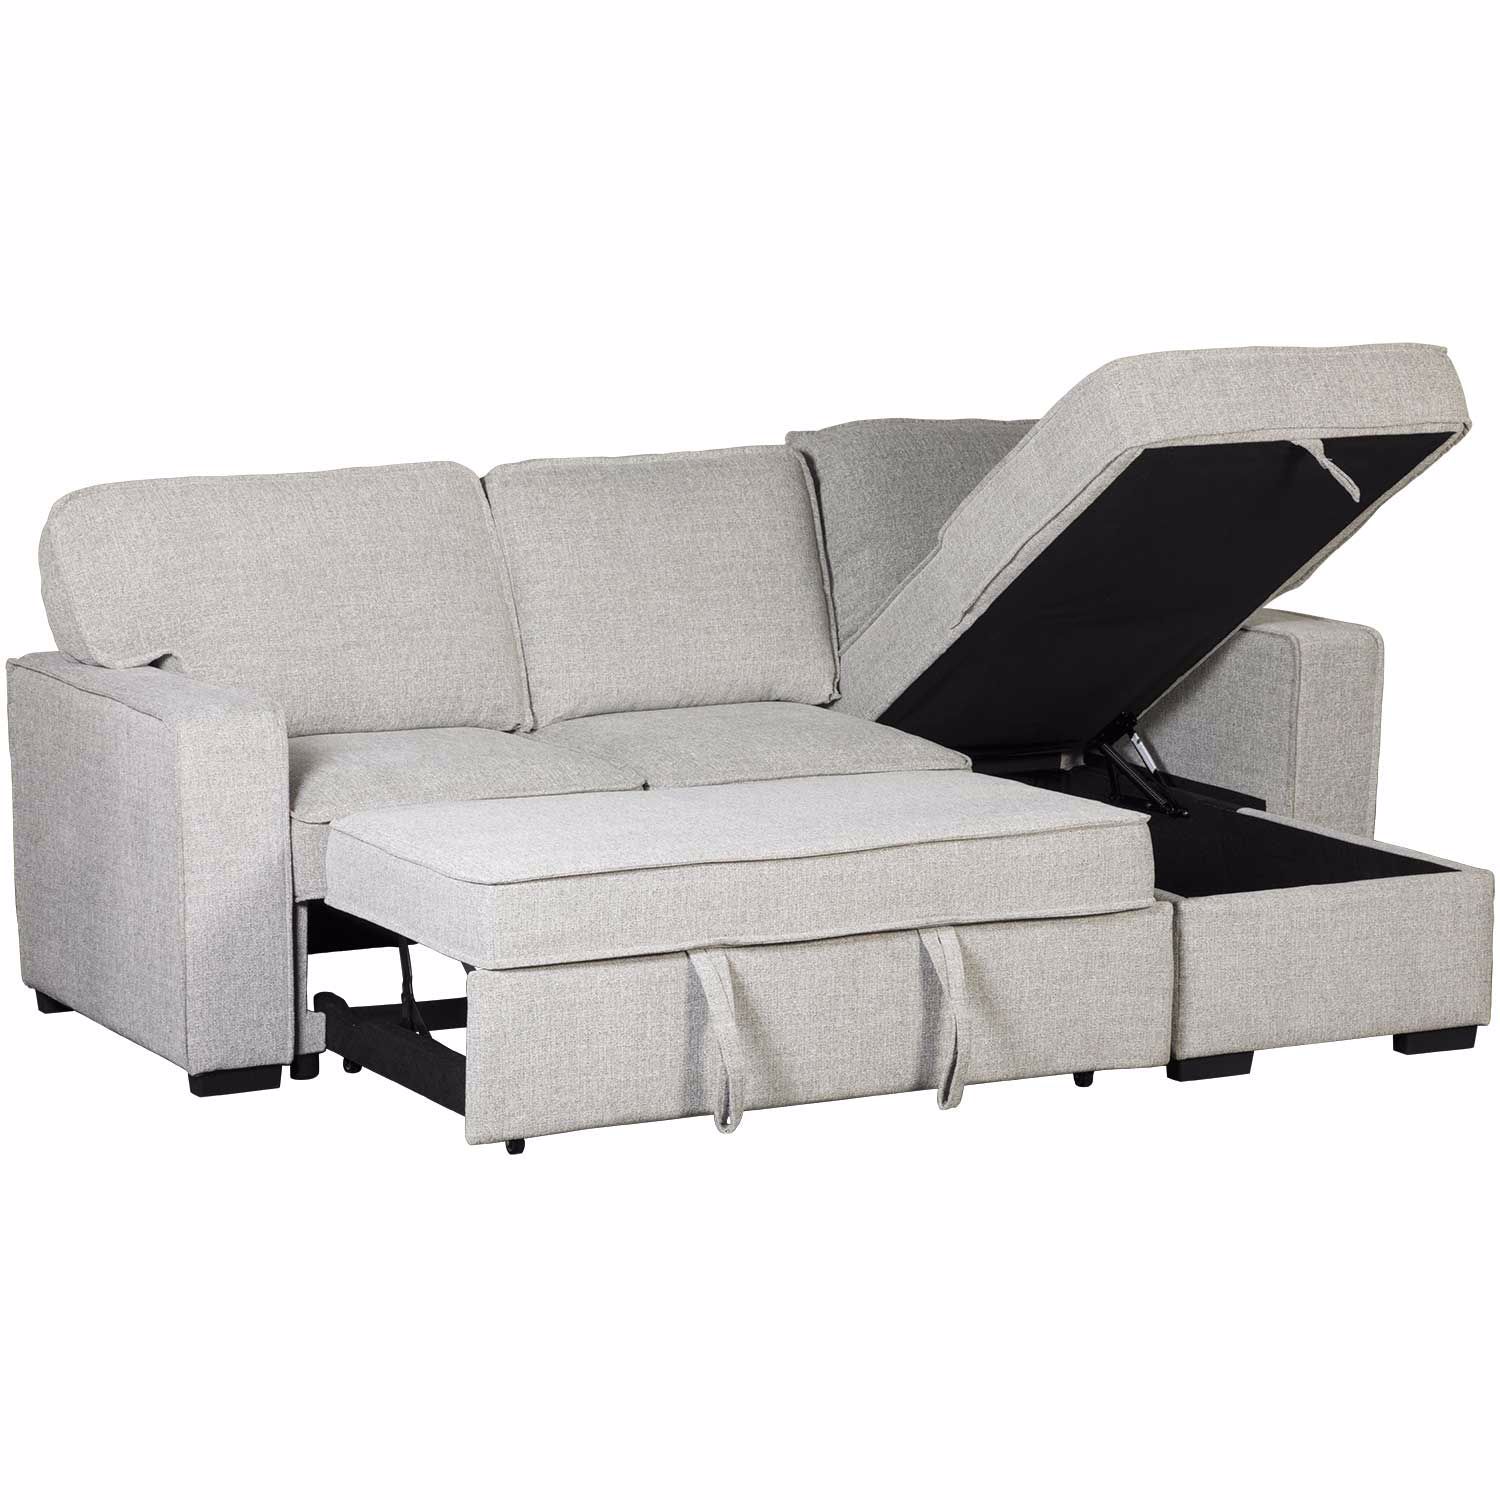 Kent Reversible Sofa Chaise with Storage 1D684LLRCARM